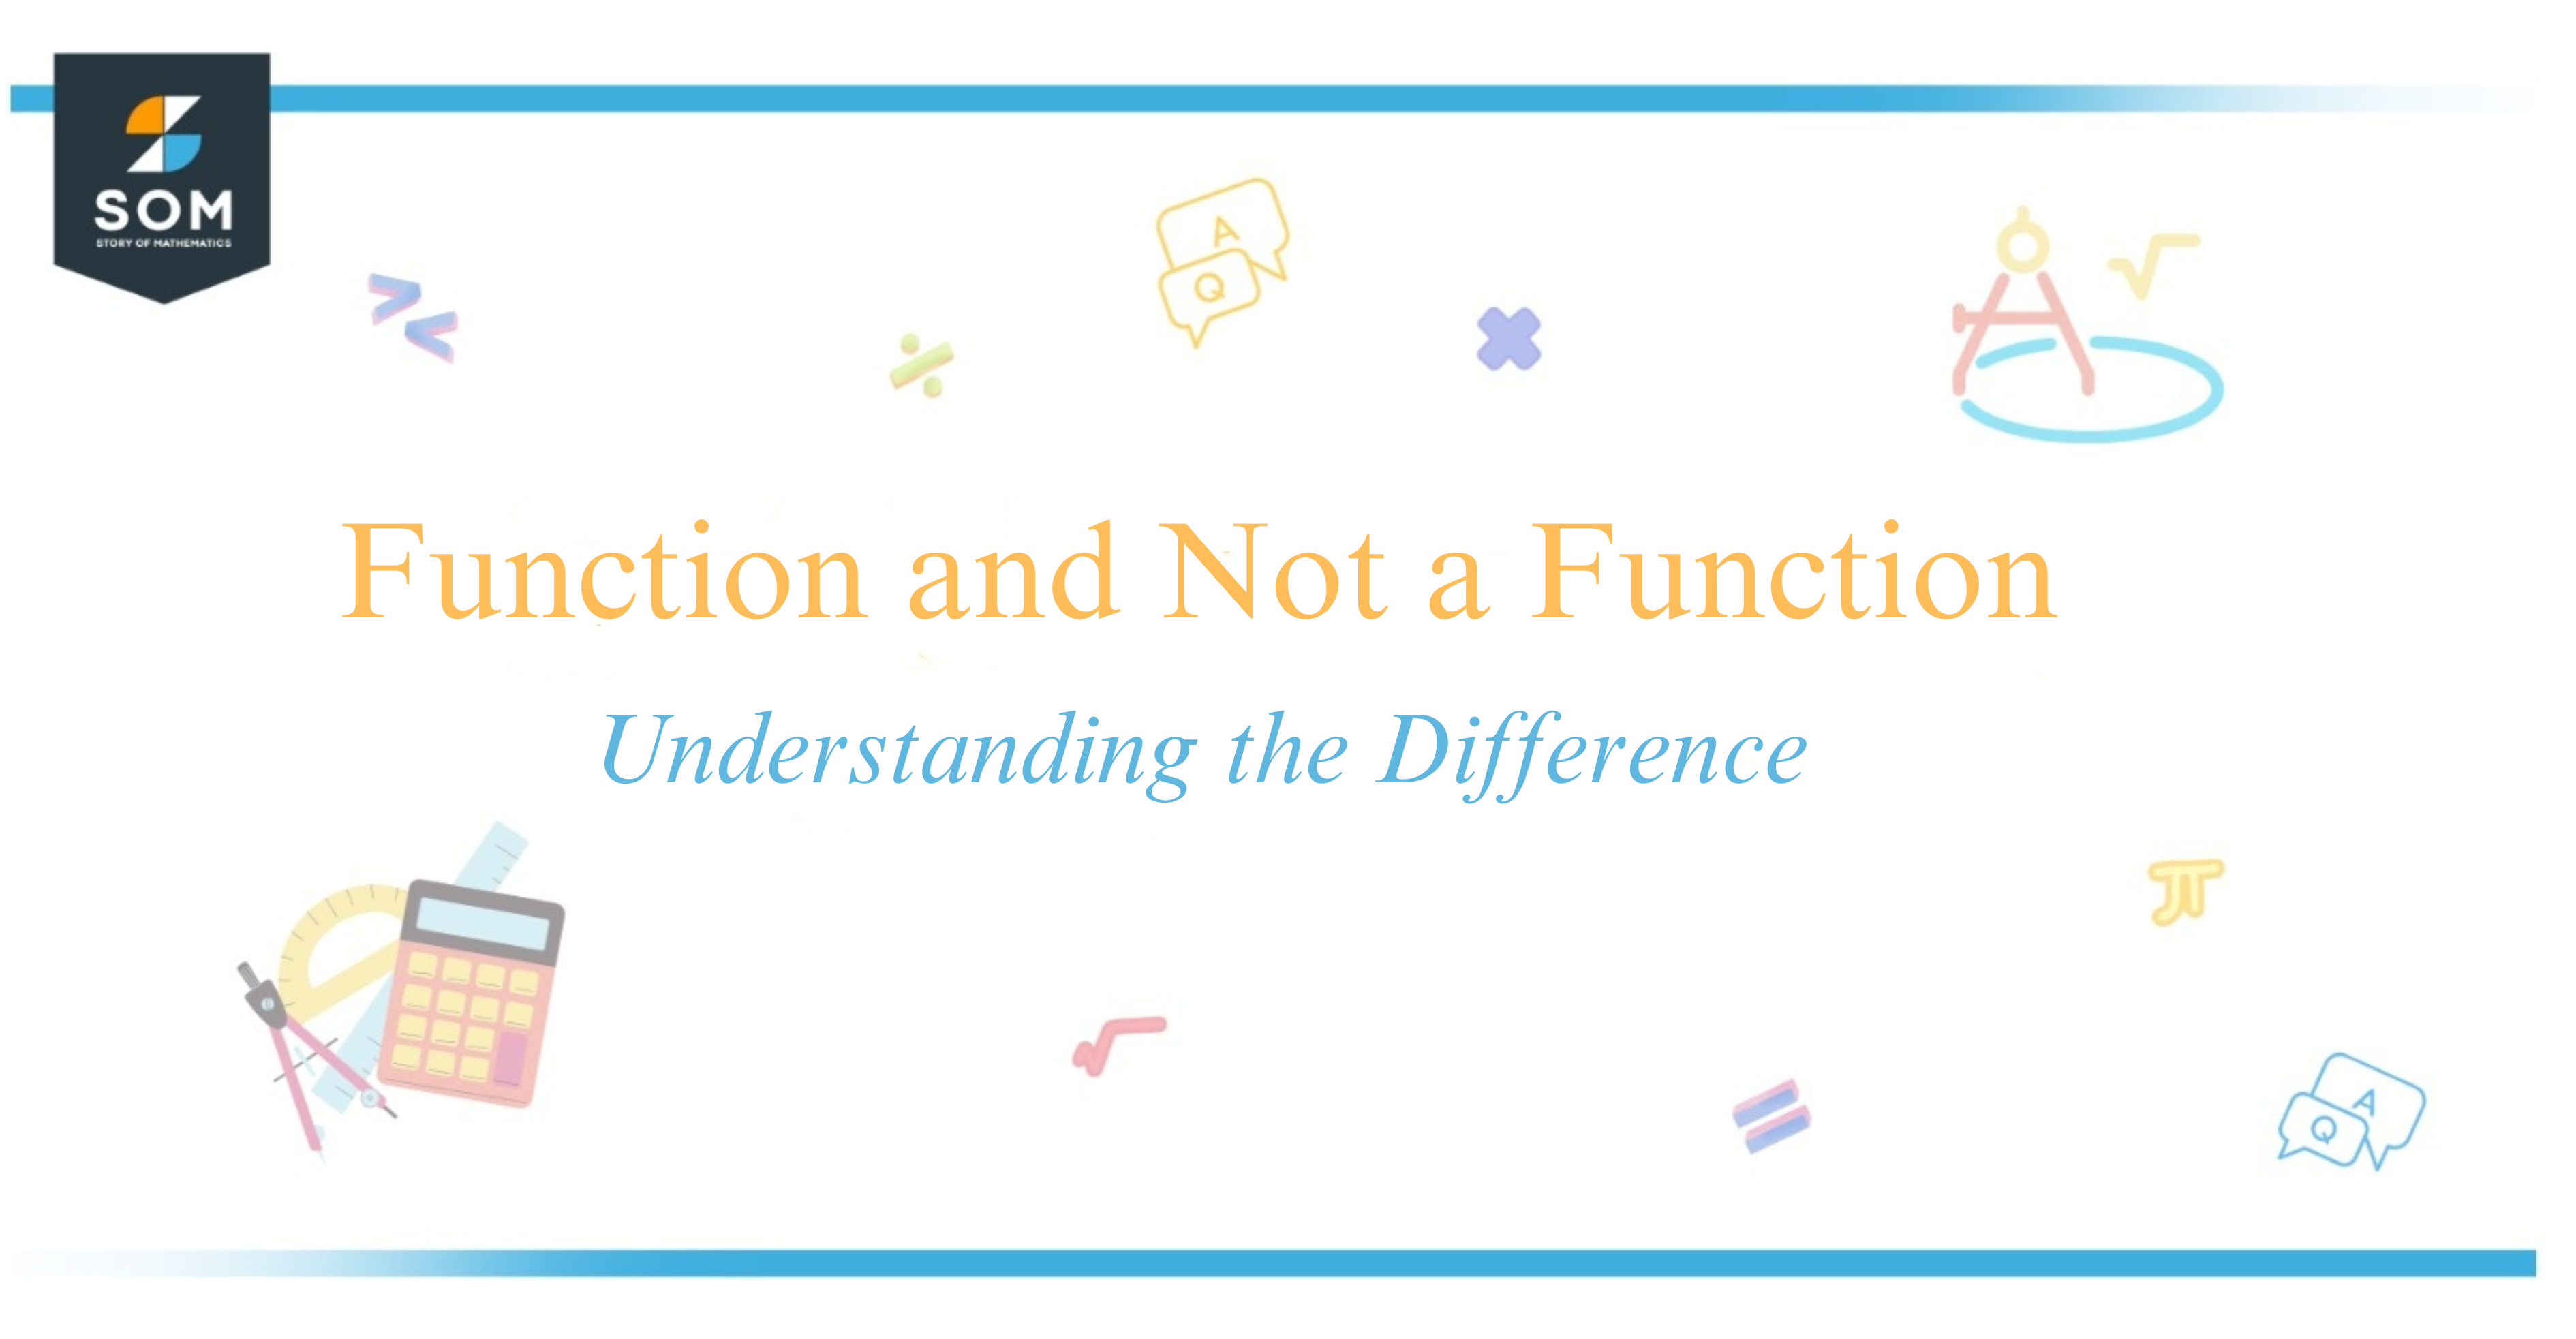 Function and Not a Function Understanding the Difference